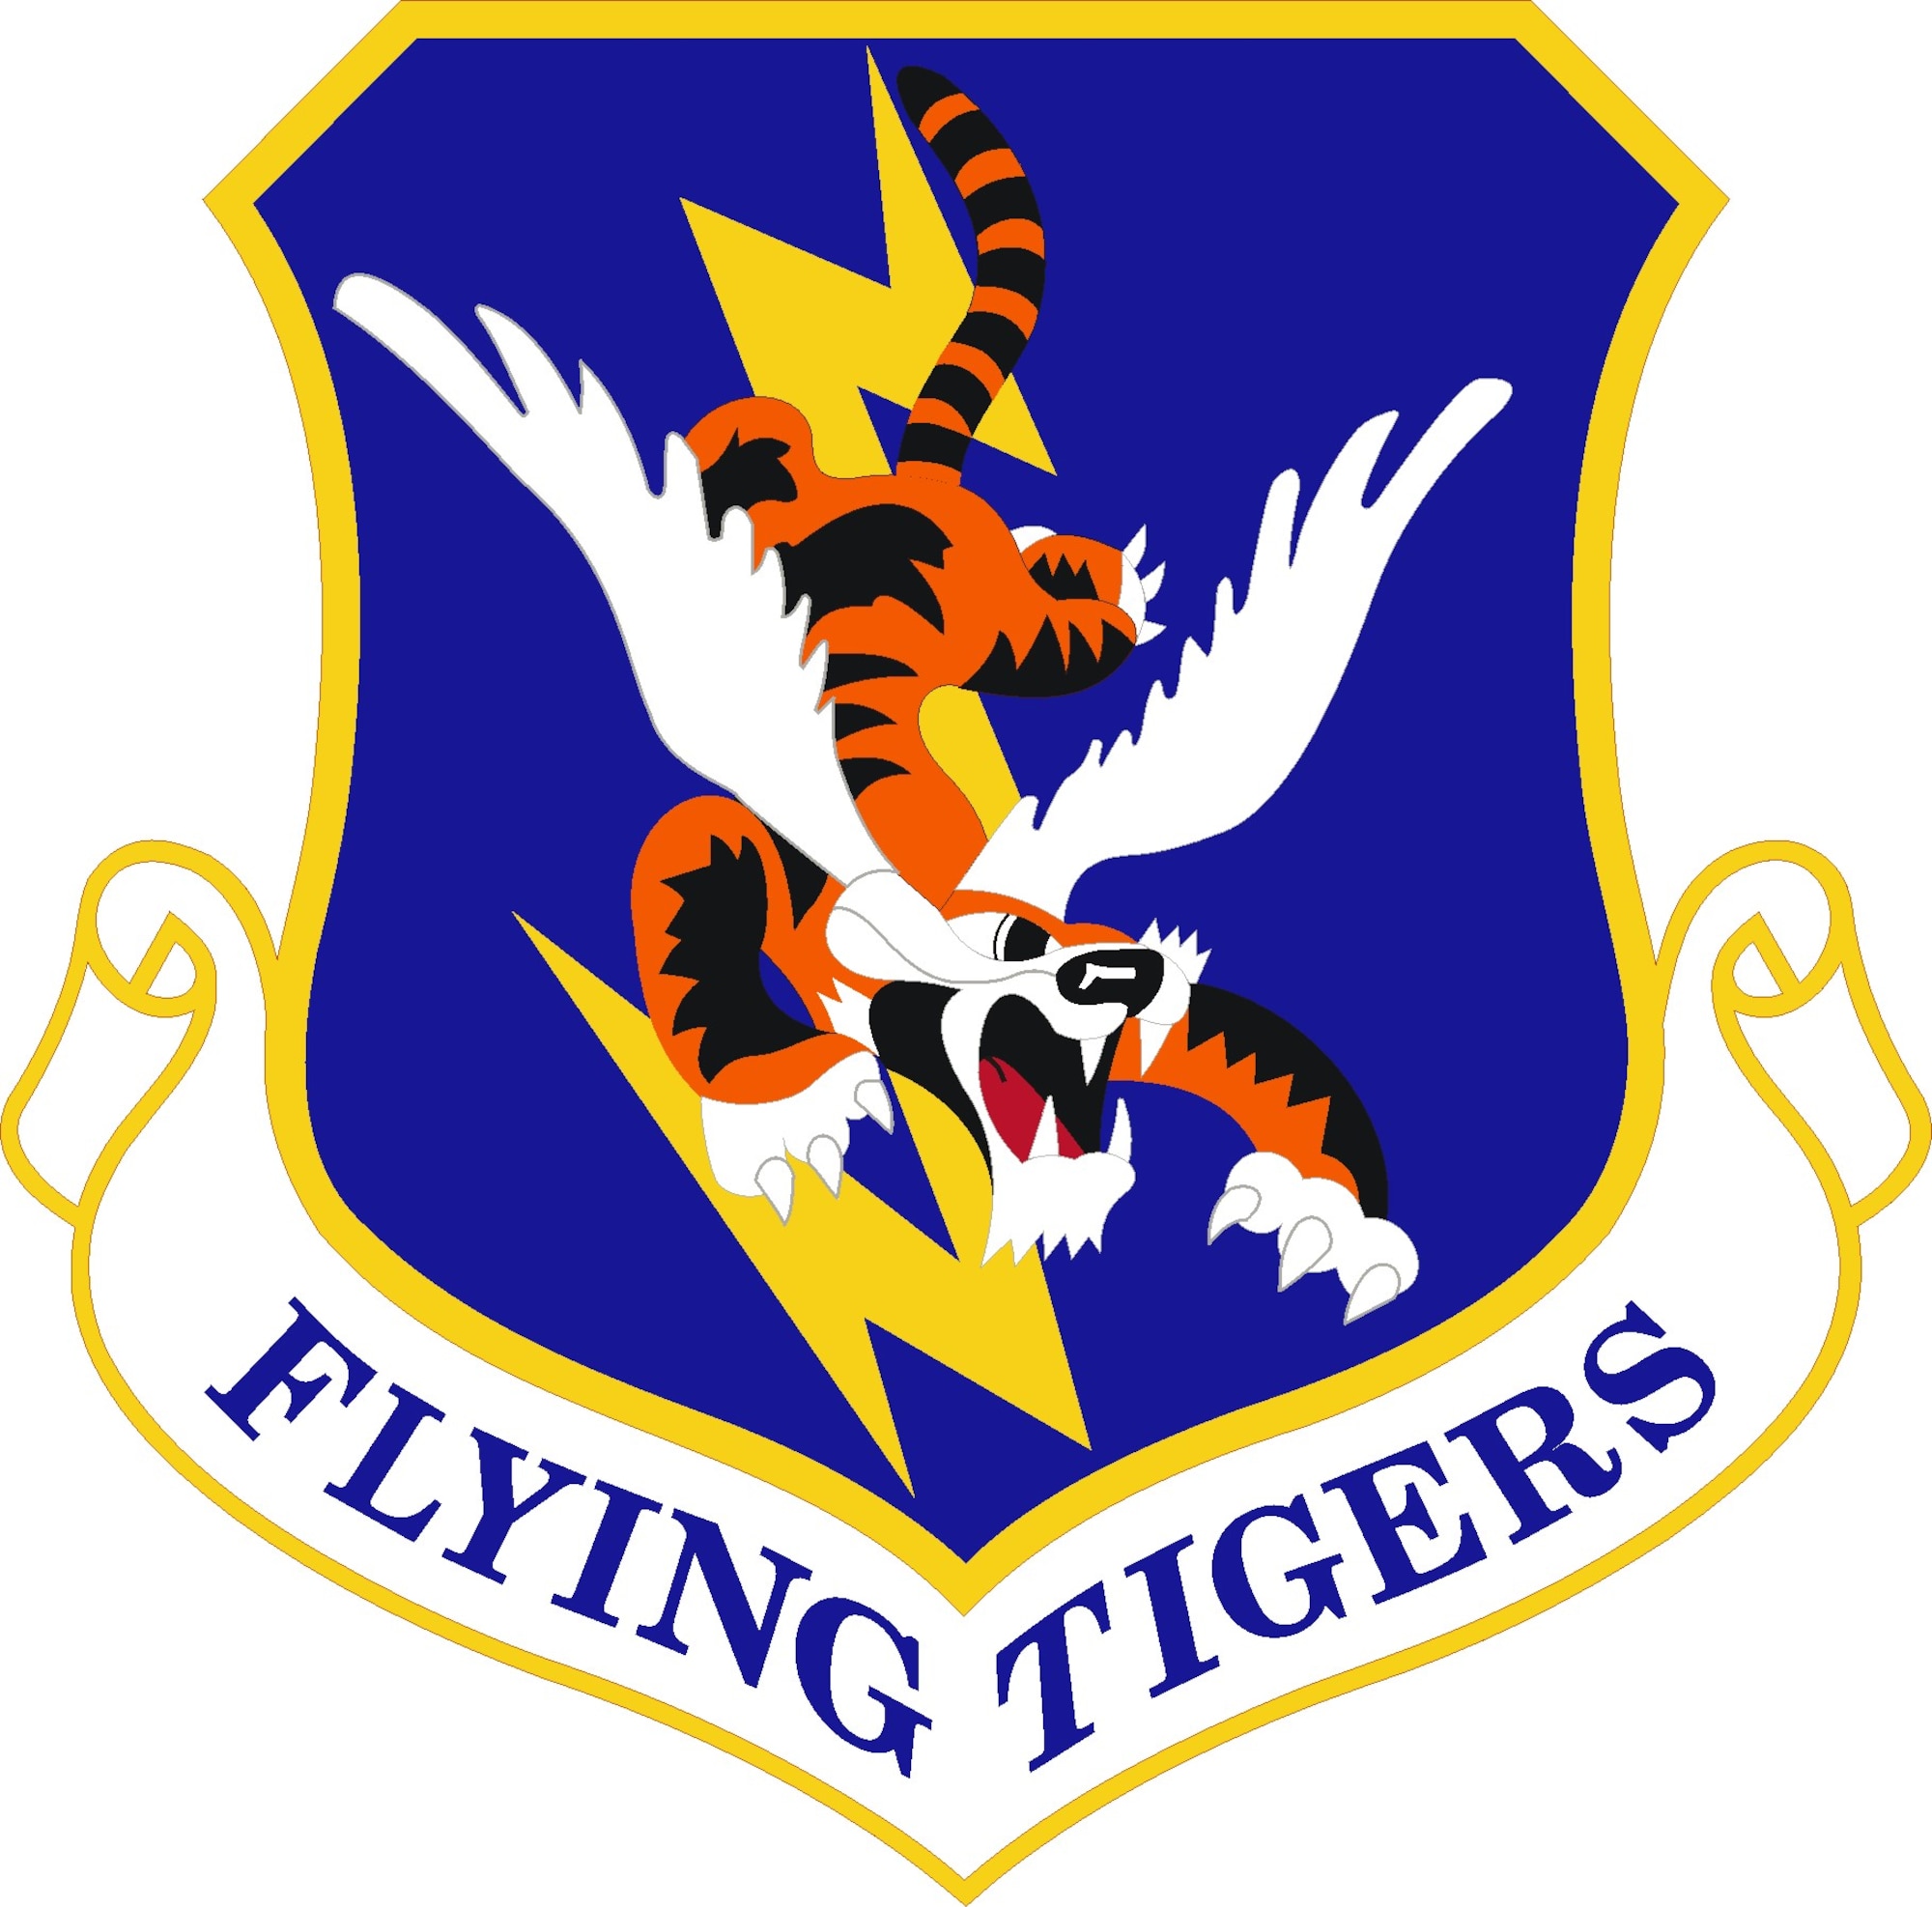 In effort to return to the Flying Tiger history, Moody reinstates the emblem originally used in 1957.
The patch that reads 23d Wing at the bottom will no longer be used. 
With the new emblem the Flying Tiger legacy continues at Moody. (contributed graphic)
